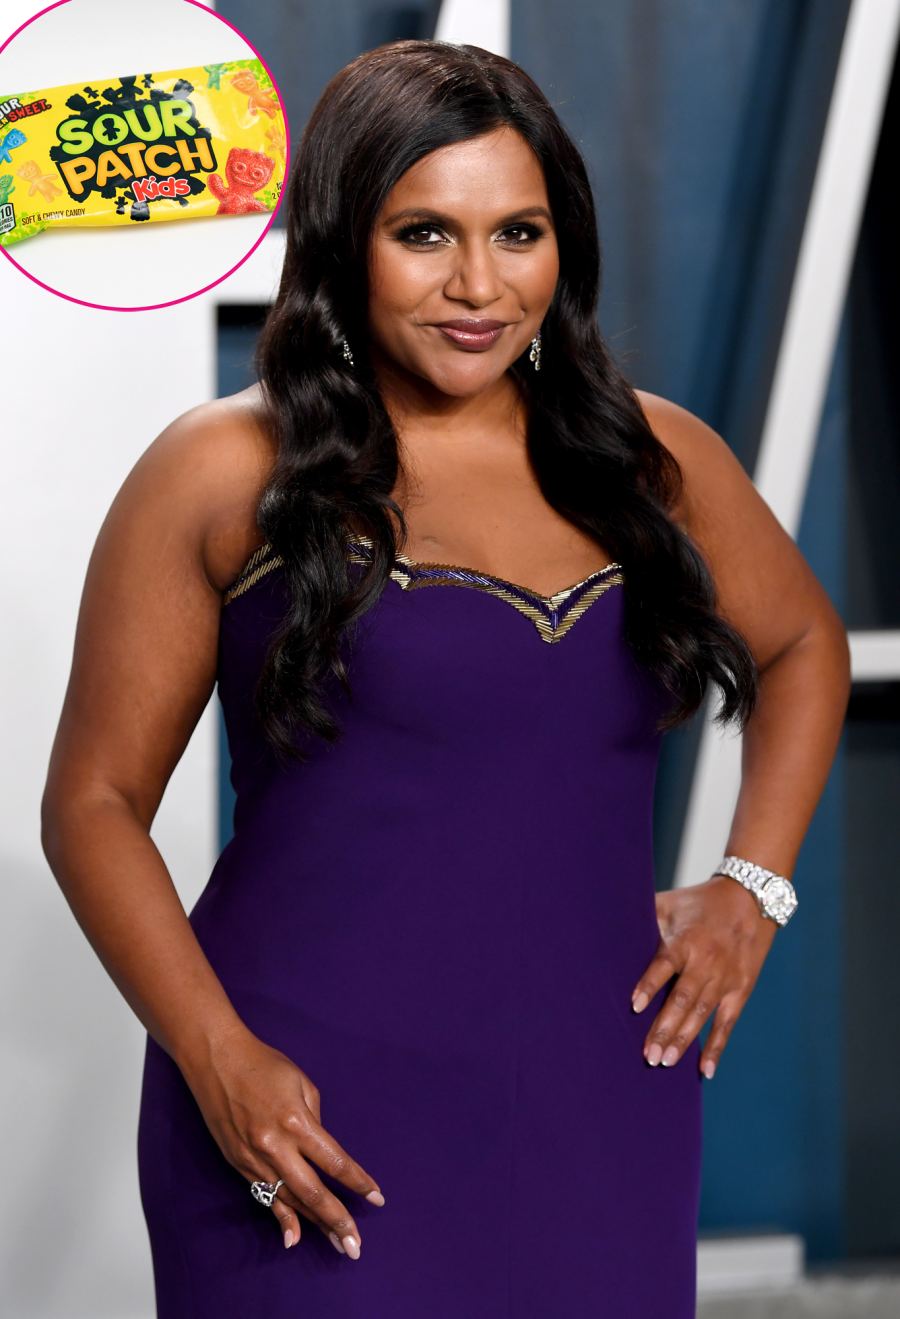 Celebrities Favorite Halloween Candy Mindy Kaling Sour Patch Kids